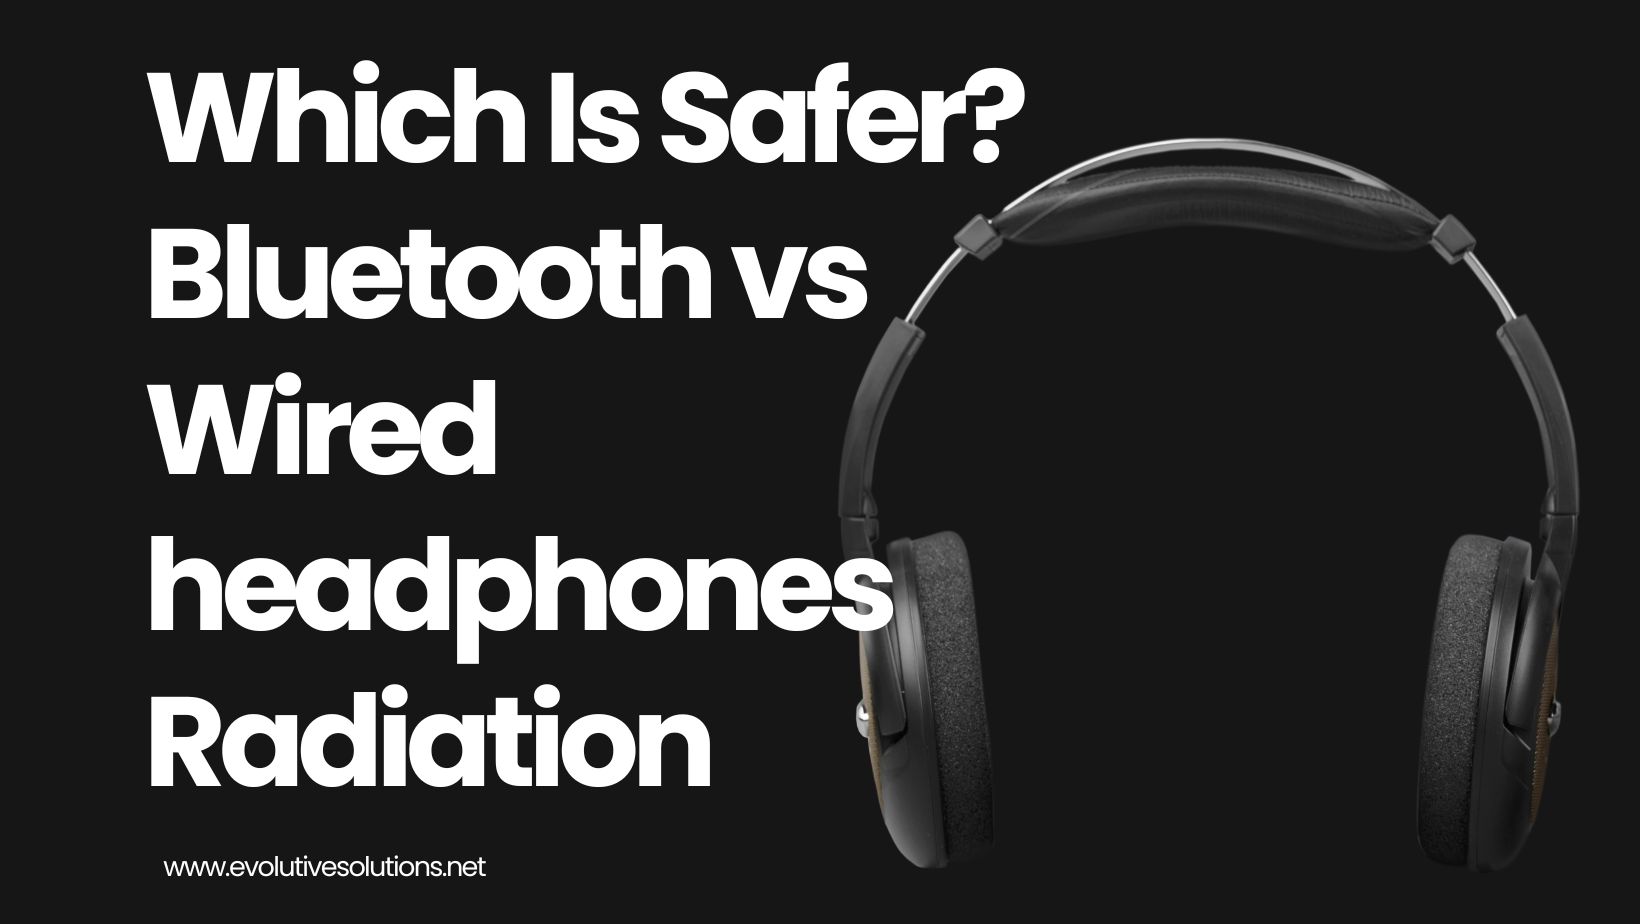 Which Is Safer? Bluetooth vs Wired headphones Radiation